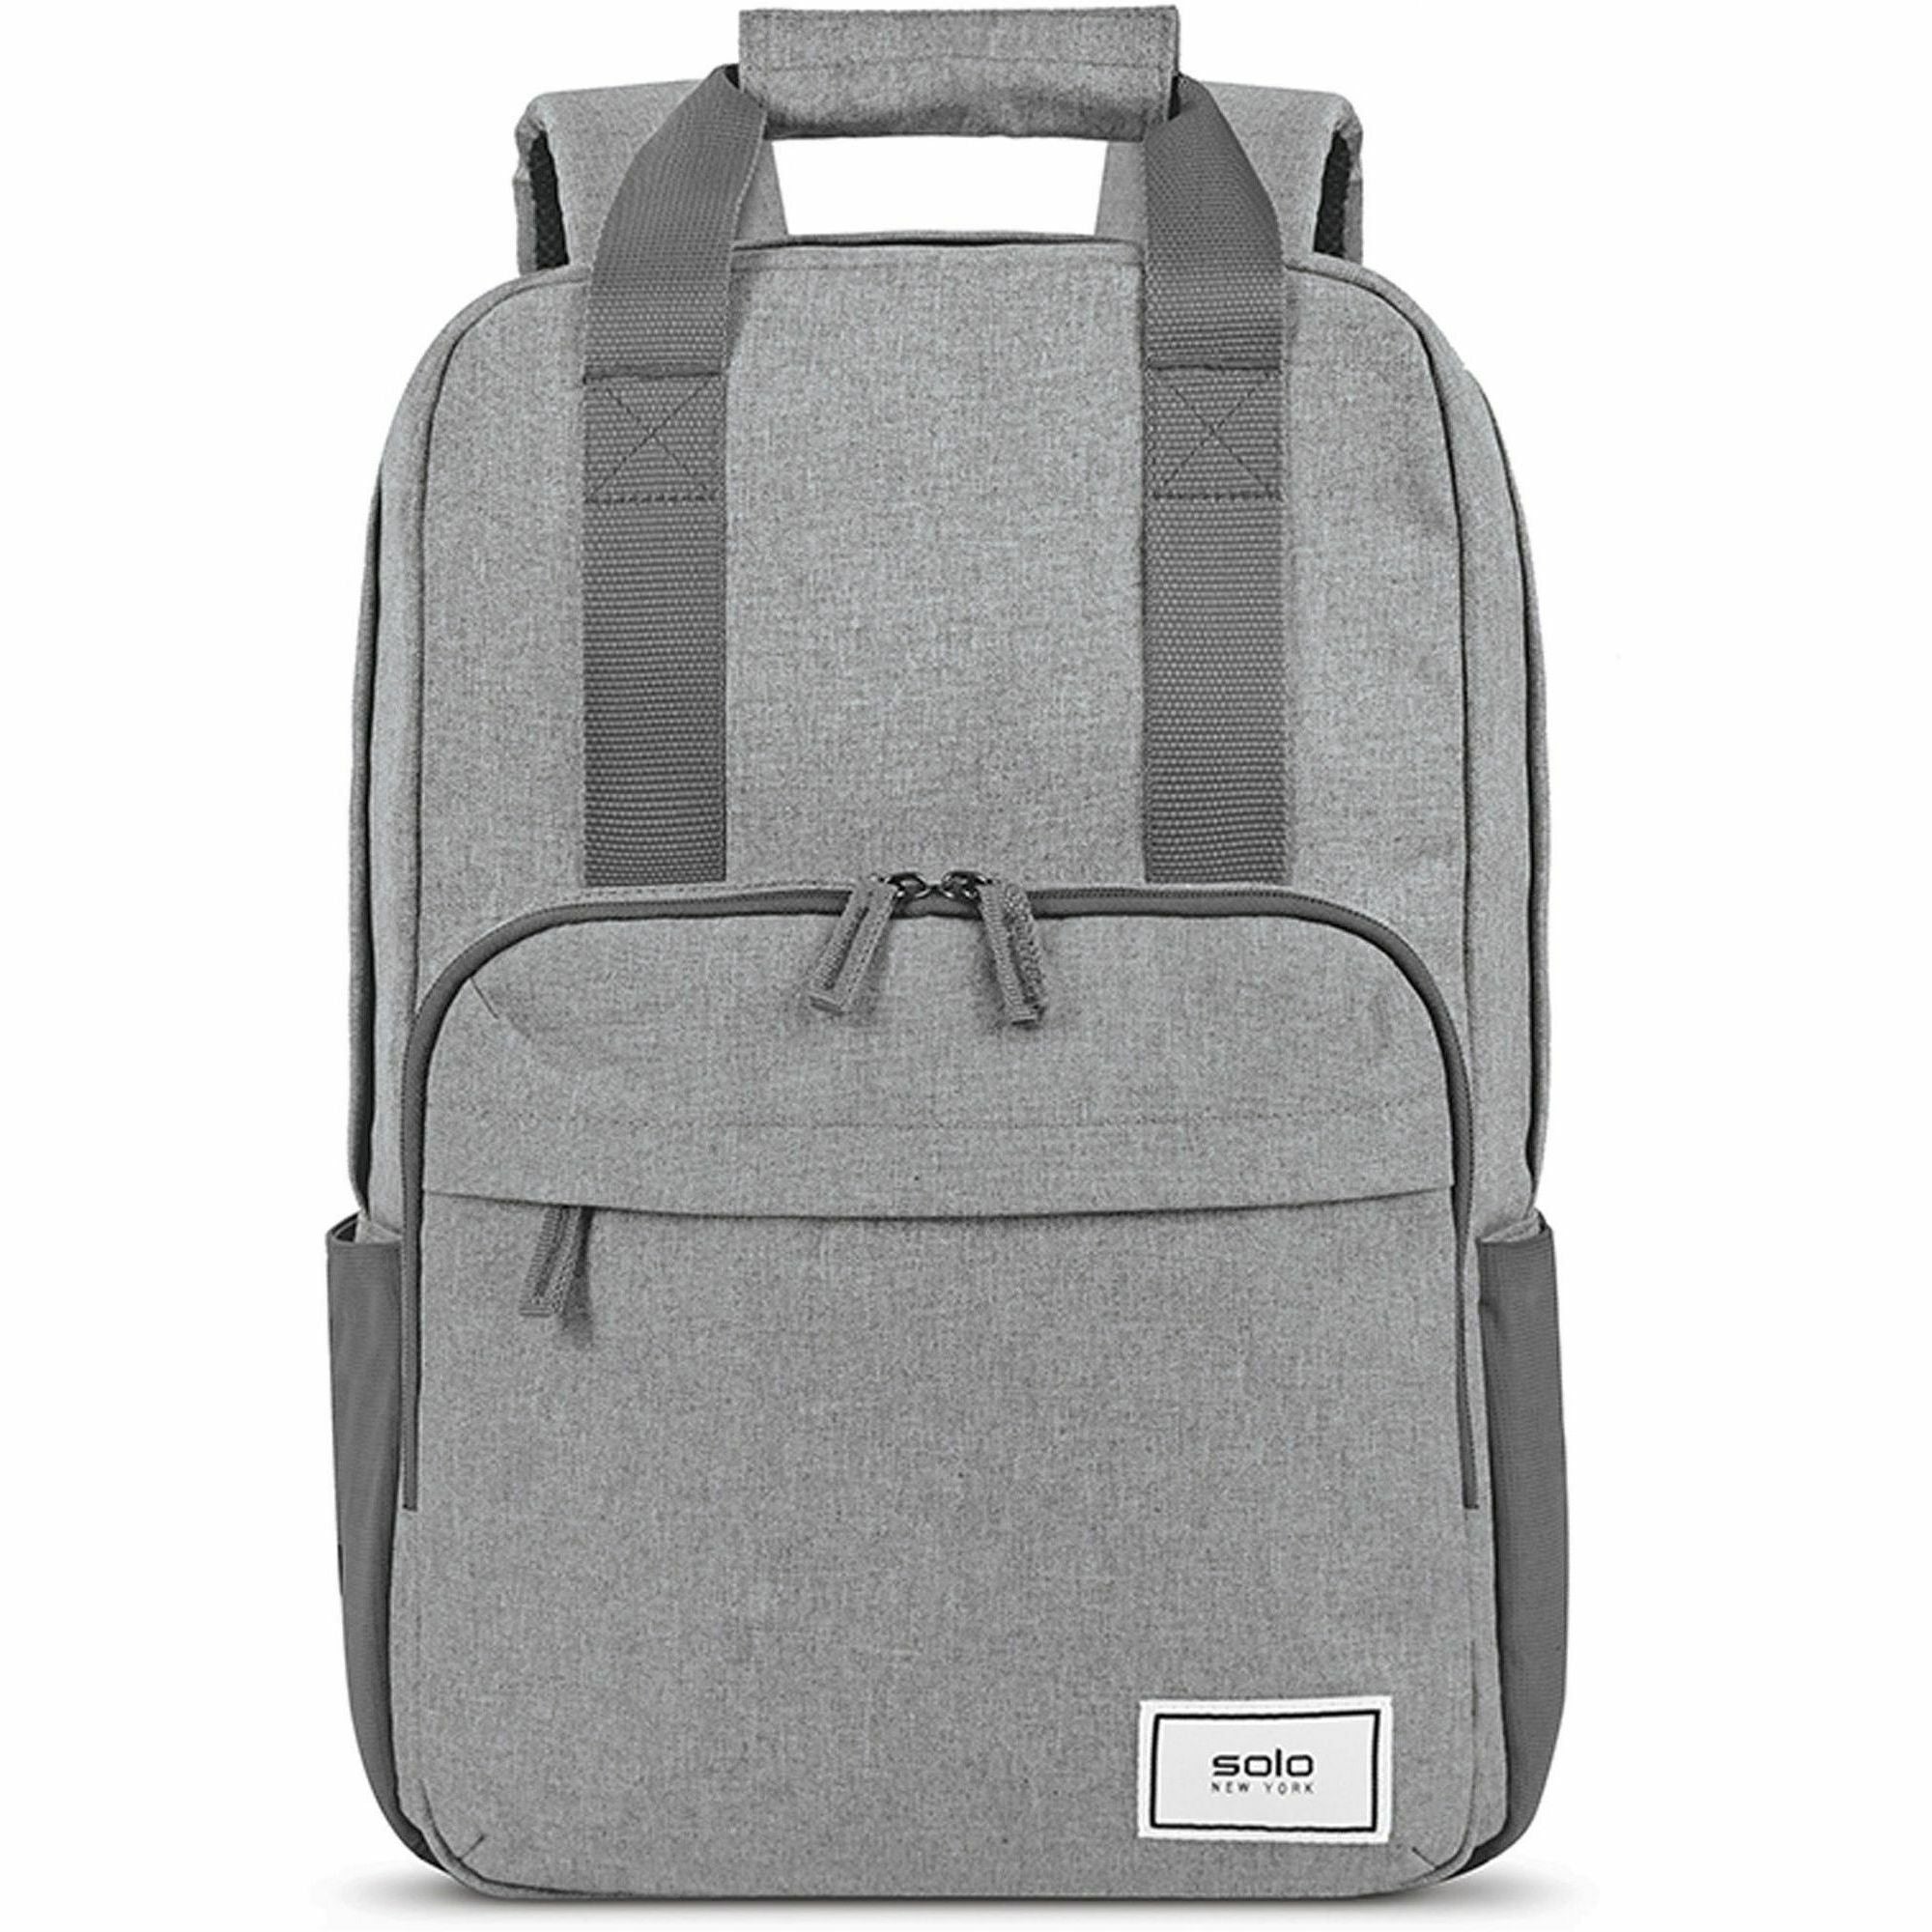 solo-reclaim-carrying-case-backpack-for-156-notebook-gray-bump-resistant-damage-resistant-shoulder-strap-luggage-strap-handle-165-height-x-123-width-x-68-depth-1-each_uslubn76010 - 2